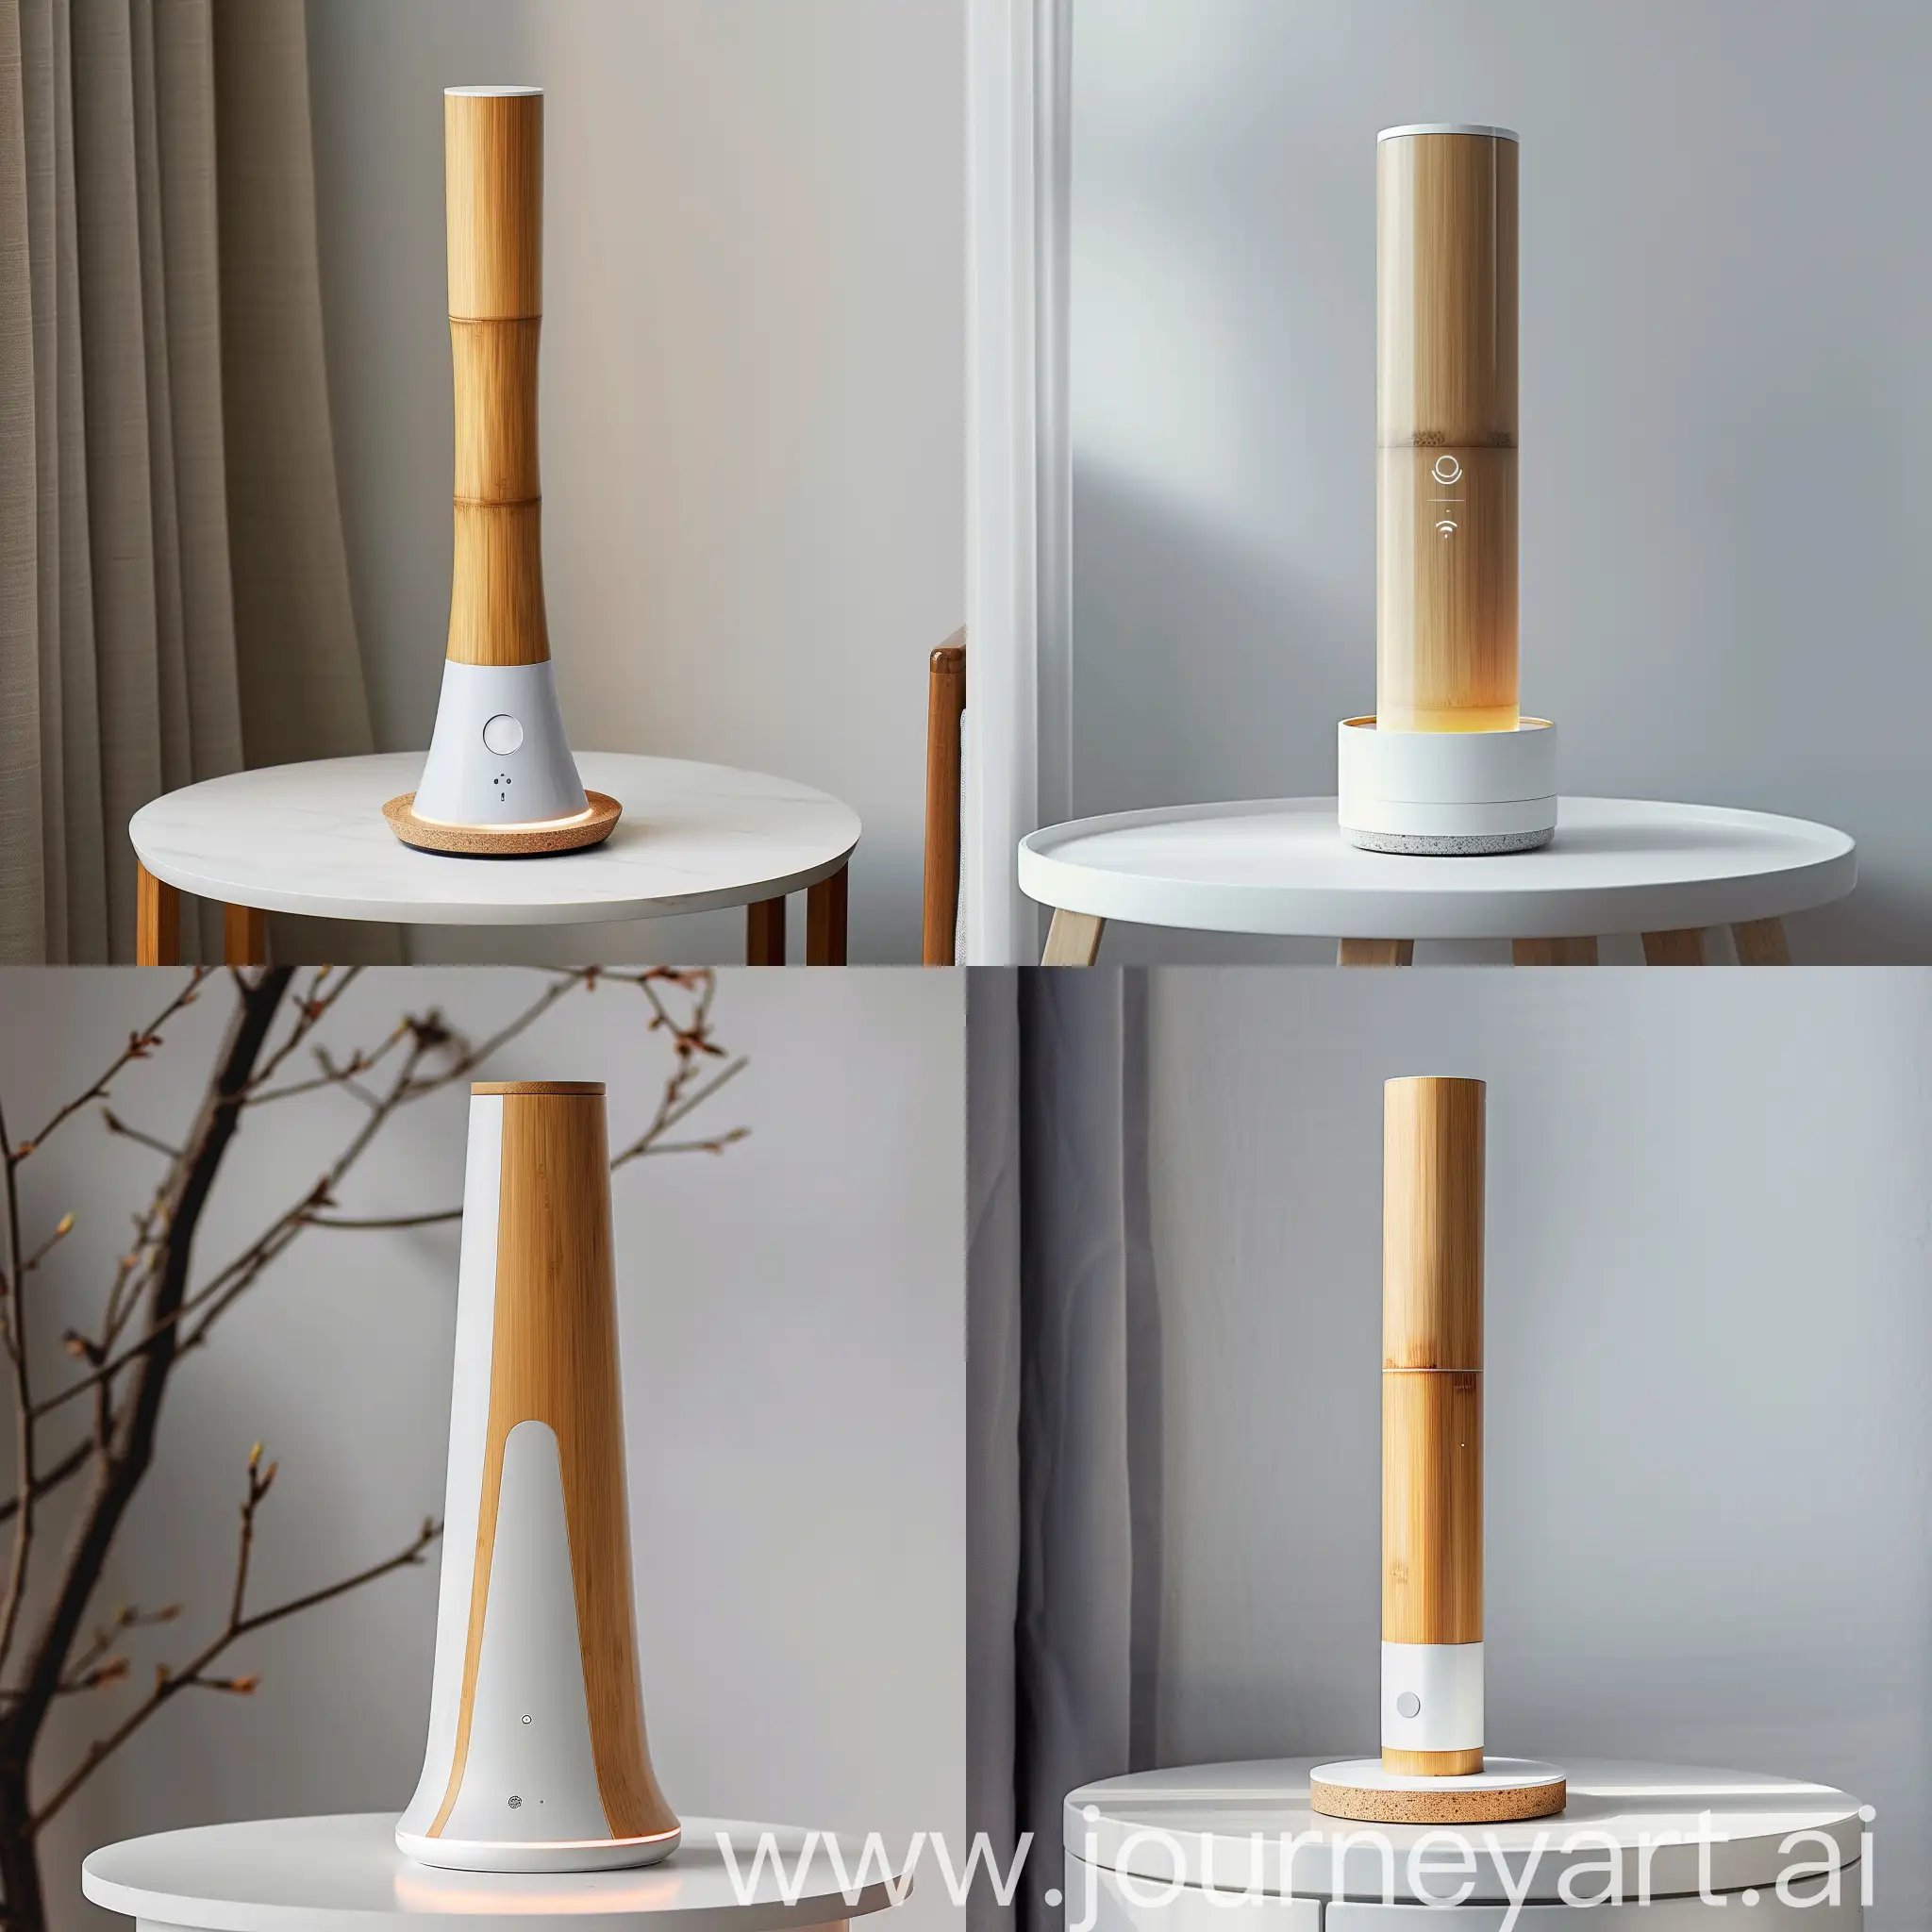 Visualize the Zenith Energy Gateway inspired of zen garden bamboo form,its base is crafted from sustainable bamboo, offering a warm, natural aesthetic that speaks to eco-friendliness. The body, made from recycled plastics, shines in a pristine white or soft light gray, designed to complement any smart home decor with its understated elegance and structure as a pinnacle of smart home energy management, blending modern design with environmental consciousness. This device embodies minimalism with its sleek, vertical silhouette, slightly tapered at the top for a subtle dynamic edge. Standing 30 cm tall with an 8 cm circular base diameter,The Zenith Energy Gateway features discreet, soft LED lighting at its base and edges, providing ambient illumination and notifications in a sophisticated manner. This lighting enhances the device's futuristic appeal, creating a visual connection between the device and its smart home environment.Designed to be both a functional energy management hub and a statement piece of technology, the Gateway stands on a minimalist side table or is mounted on a clean, white wall, integrating seamlessly into the smart home aesthetic. Its form factor and material choice symbolize a commitment to sustainability, innovation, and design excellence, aiming to resonate with modern homeowners who prioritize eco-conscious living without compromising on style.The image should capture the essence of the Zenith Energy Gateway in a contemporary setting, highlighting its role as an elegant, technologically advanced, and environmentally friendly addition to the smart home.product design style